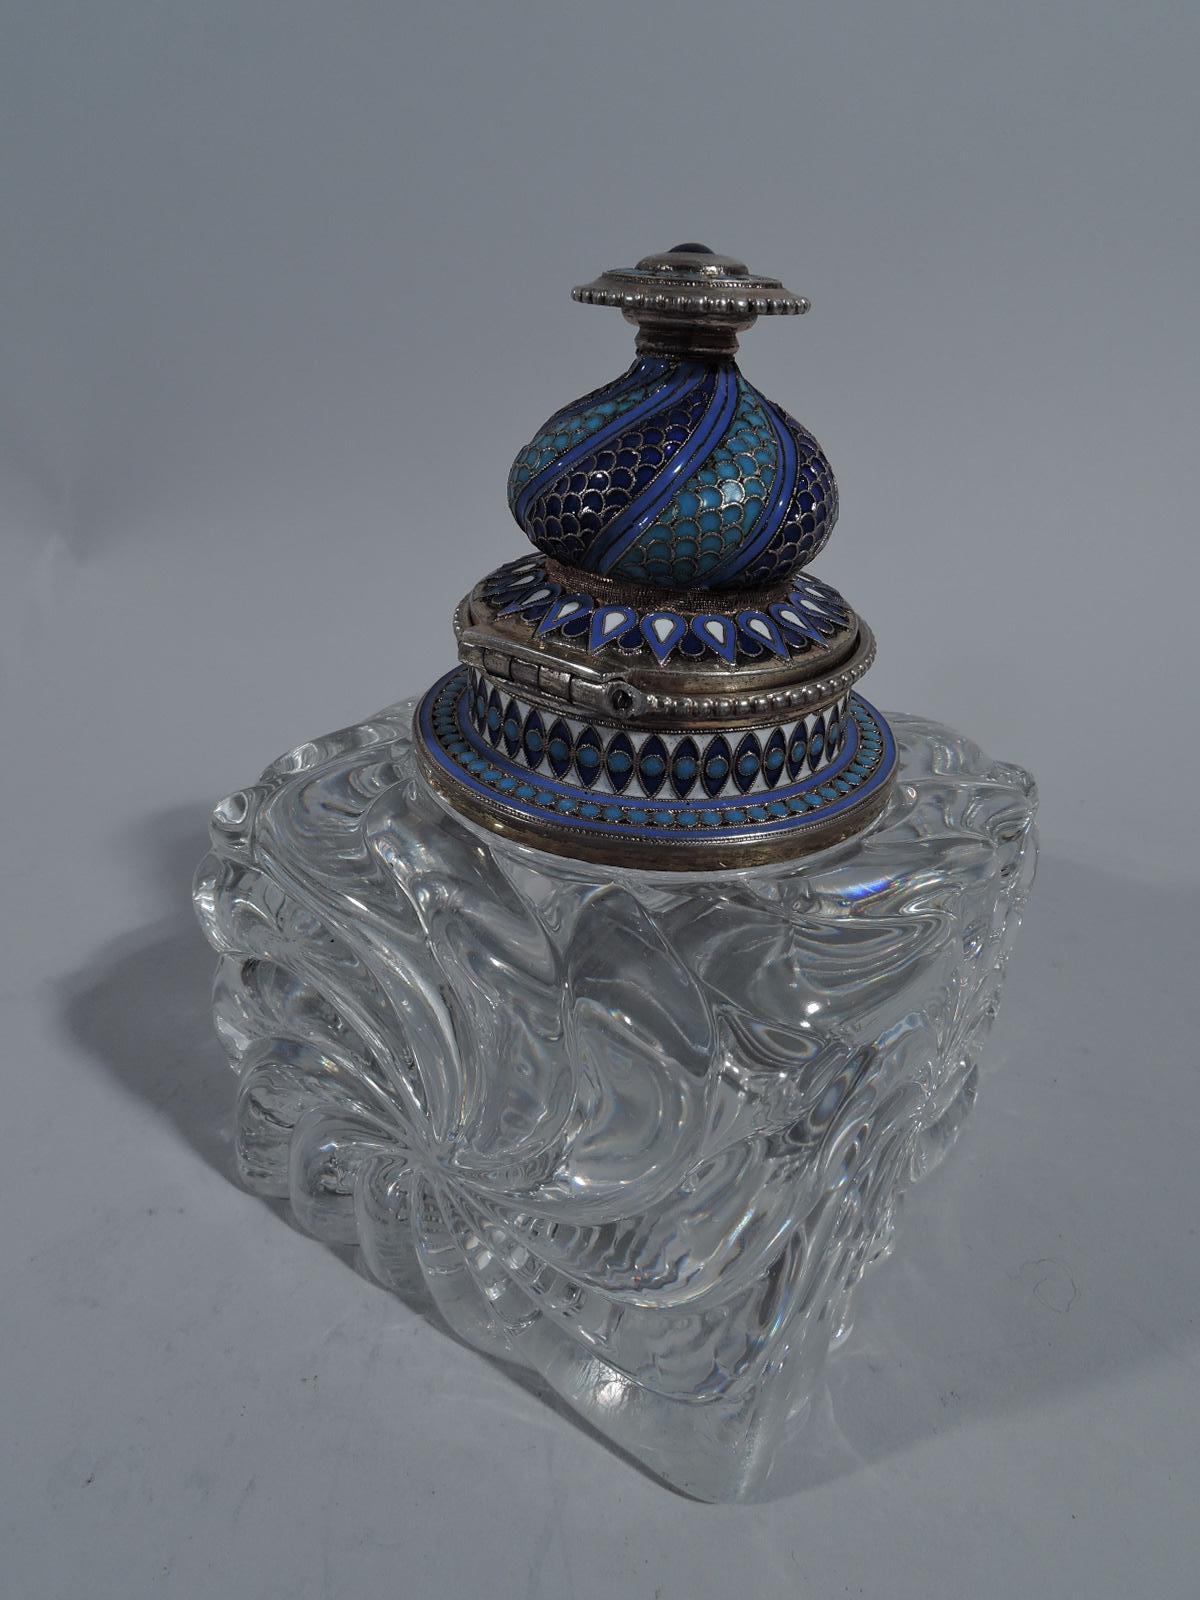 Russian silver and glass inkwell, 1888. Rectangular clear glass block with carved radiating scrolls. Silver gilt collar and hinged onion-dome cover with disc finial. Silver has enameled beading, leaf-and-dart, and fish scale in blues and white. A